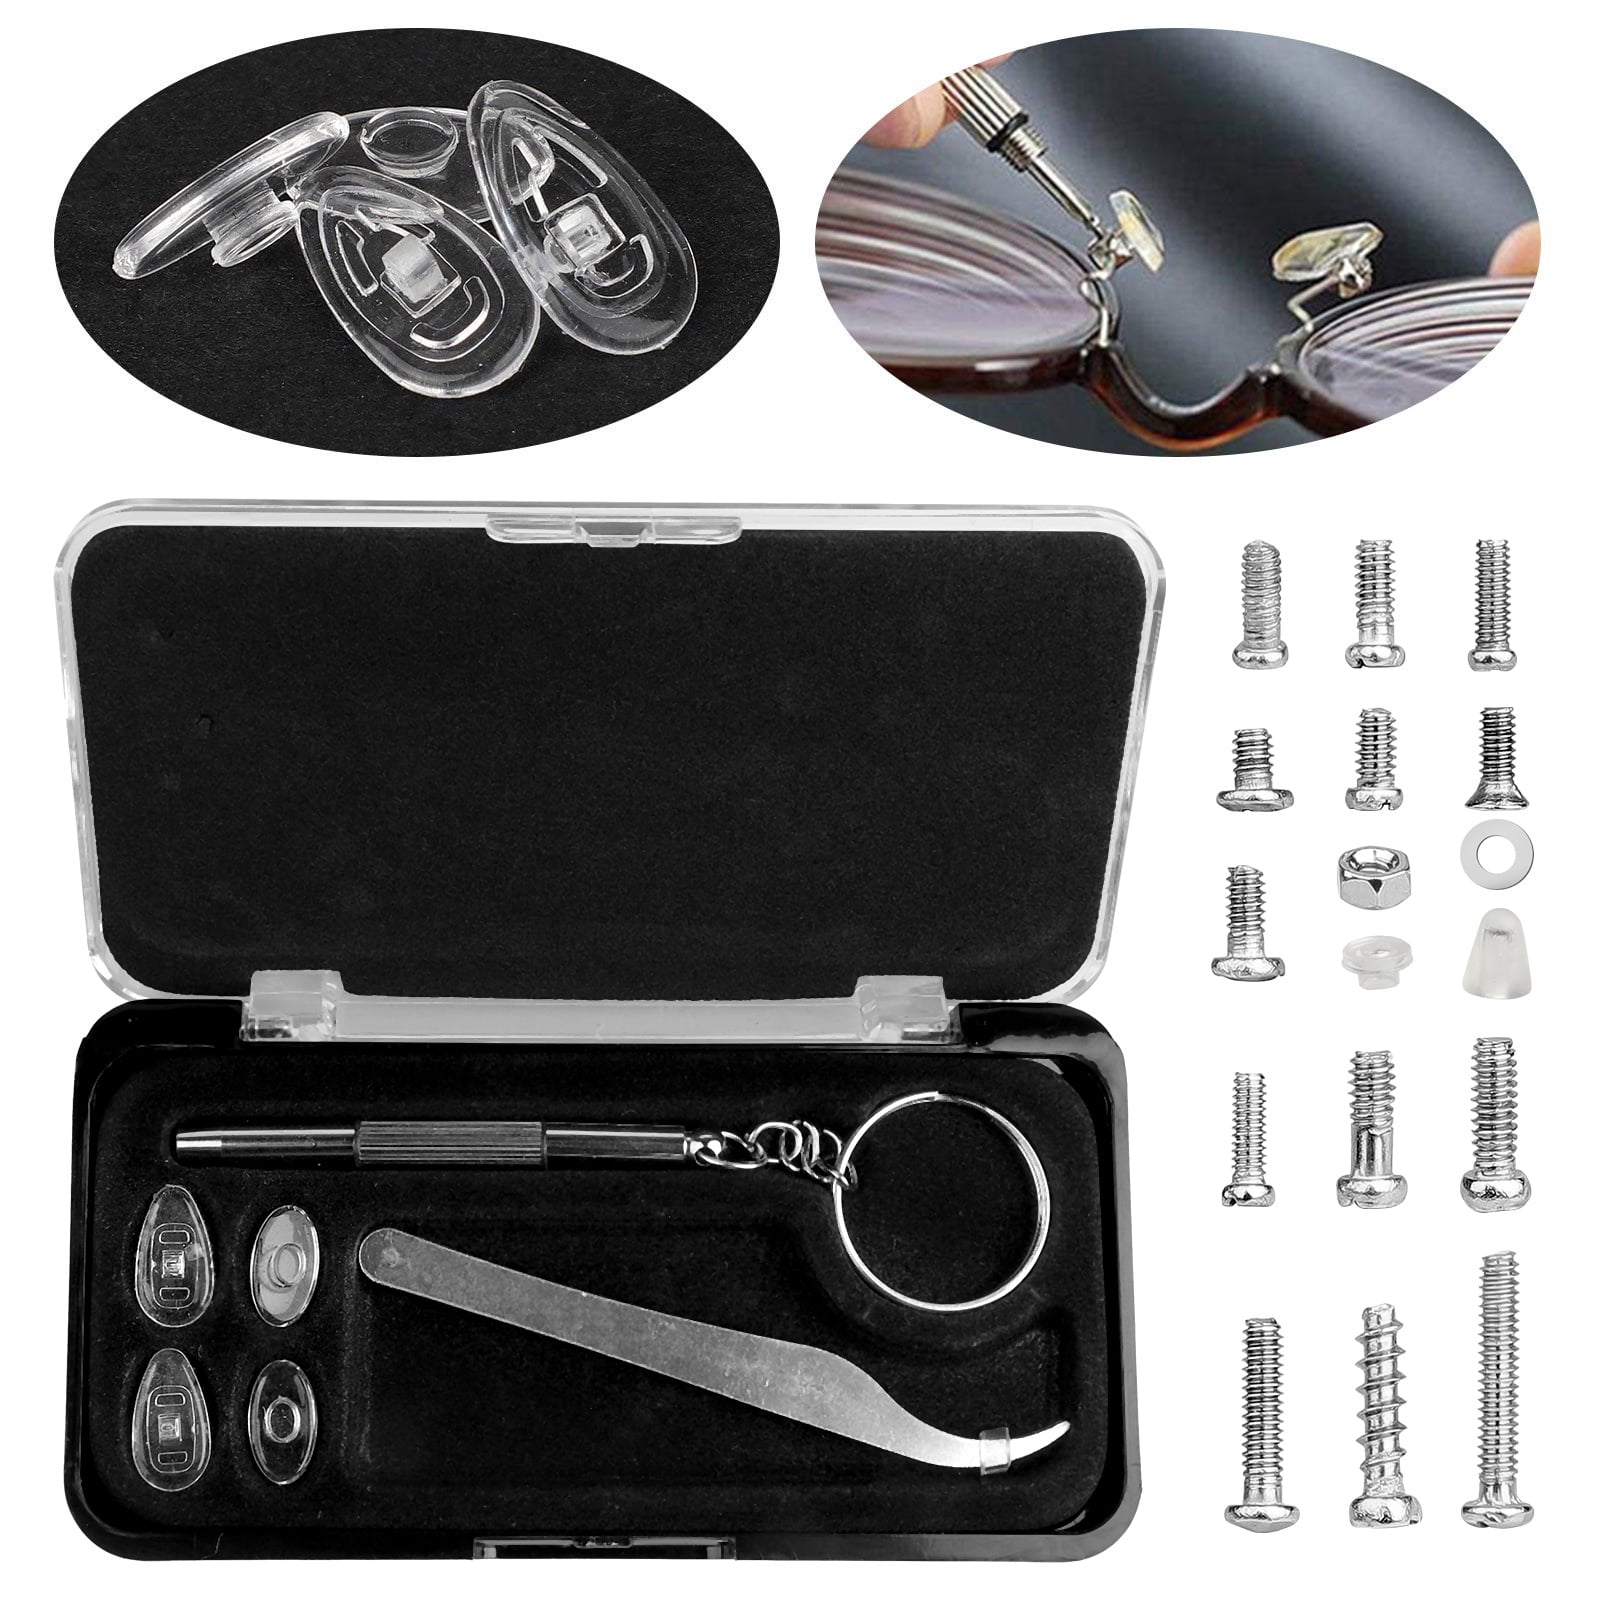 Eyeglass Repair Kit with 6 Pcs Screwdrivers and Stainless Steel Glass Screws for Glasses Sunglass Repair Eye Glass 